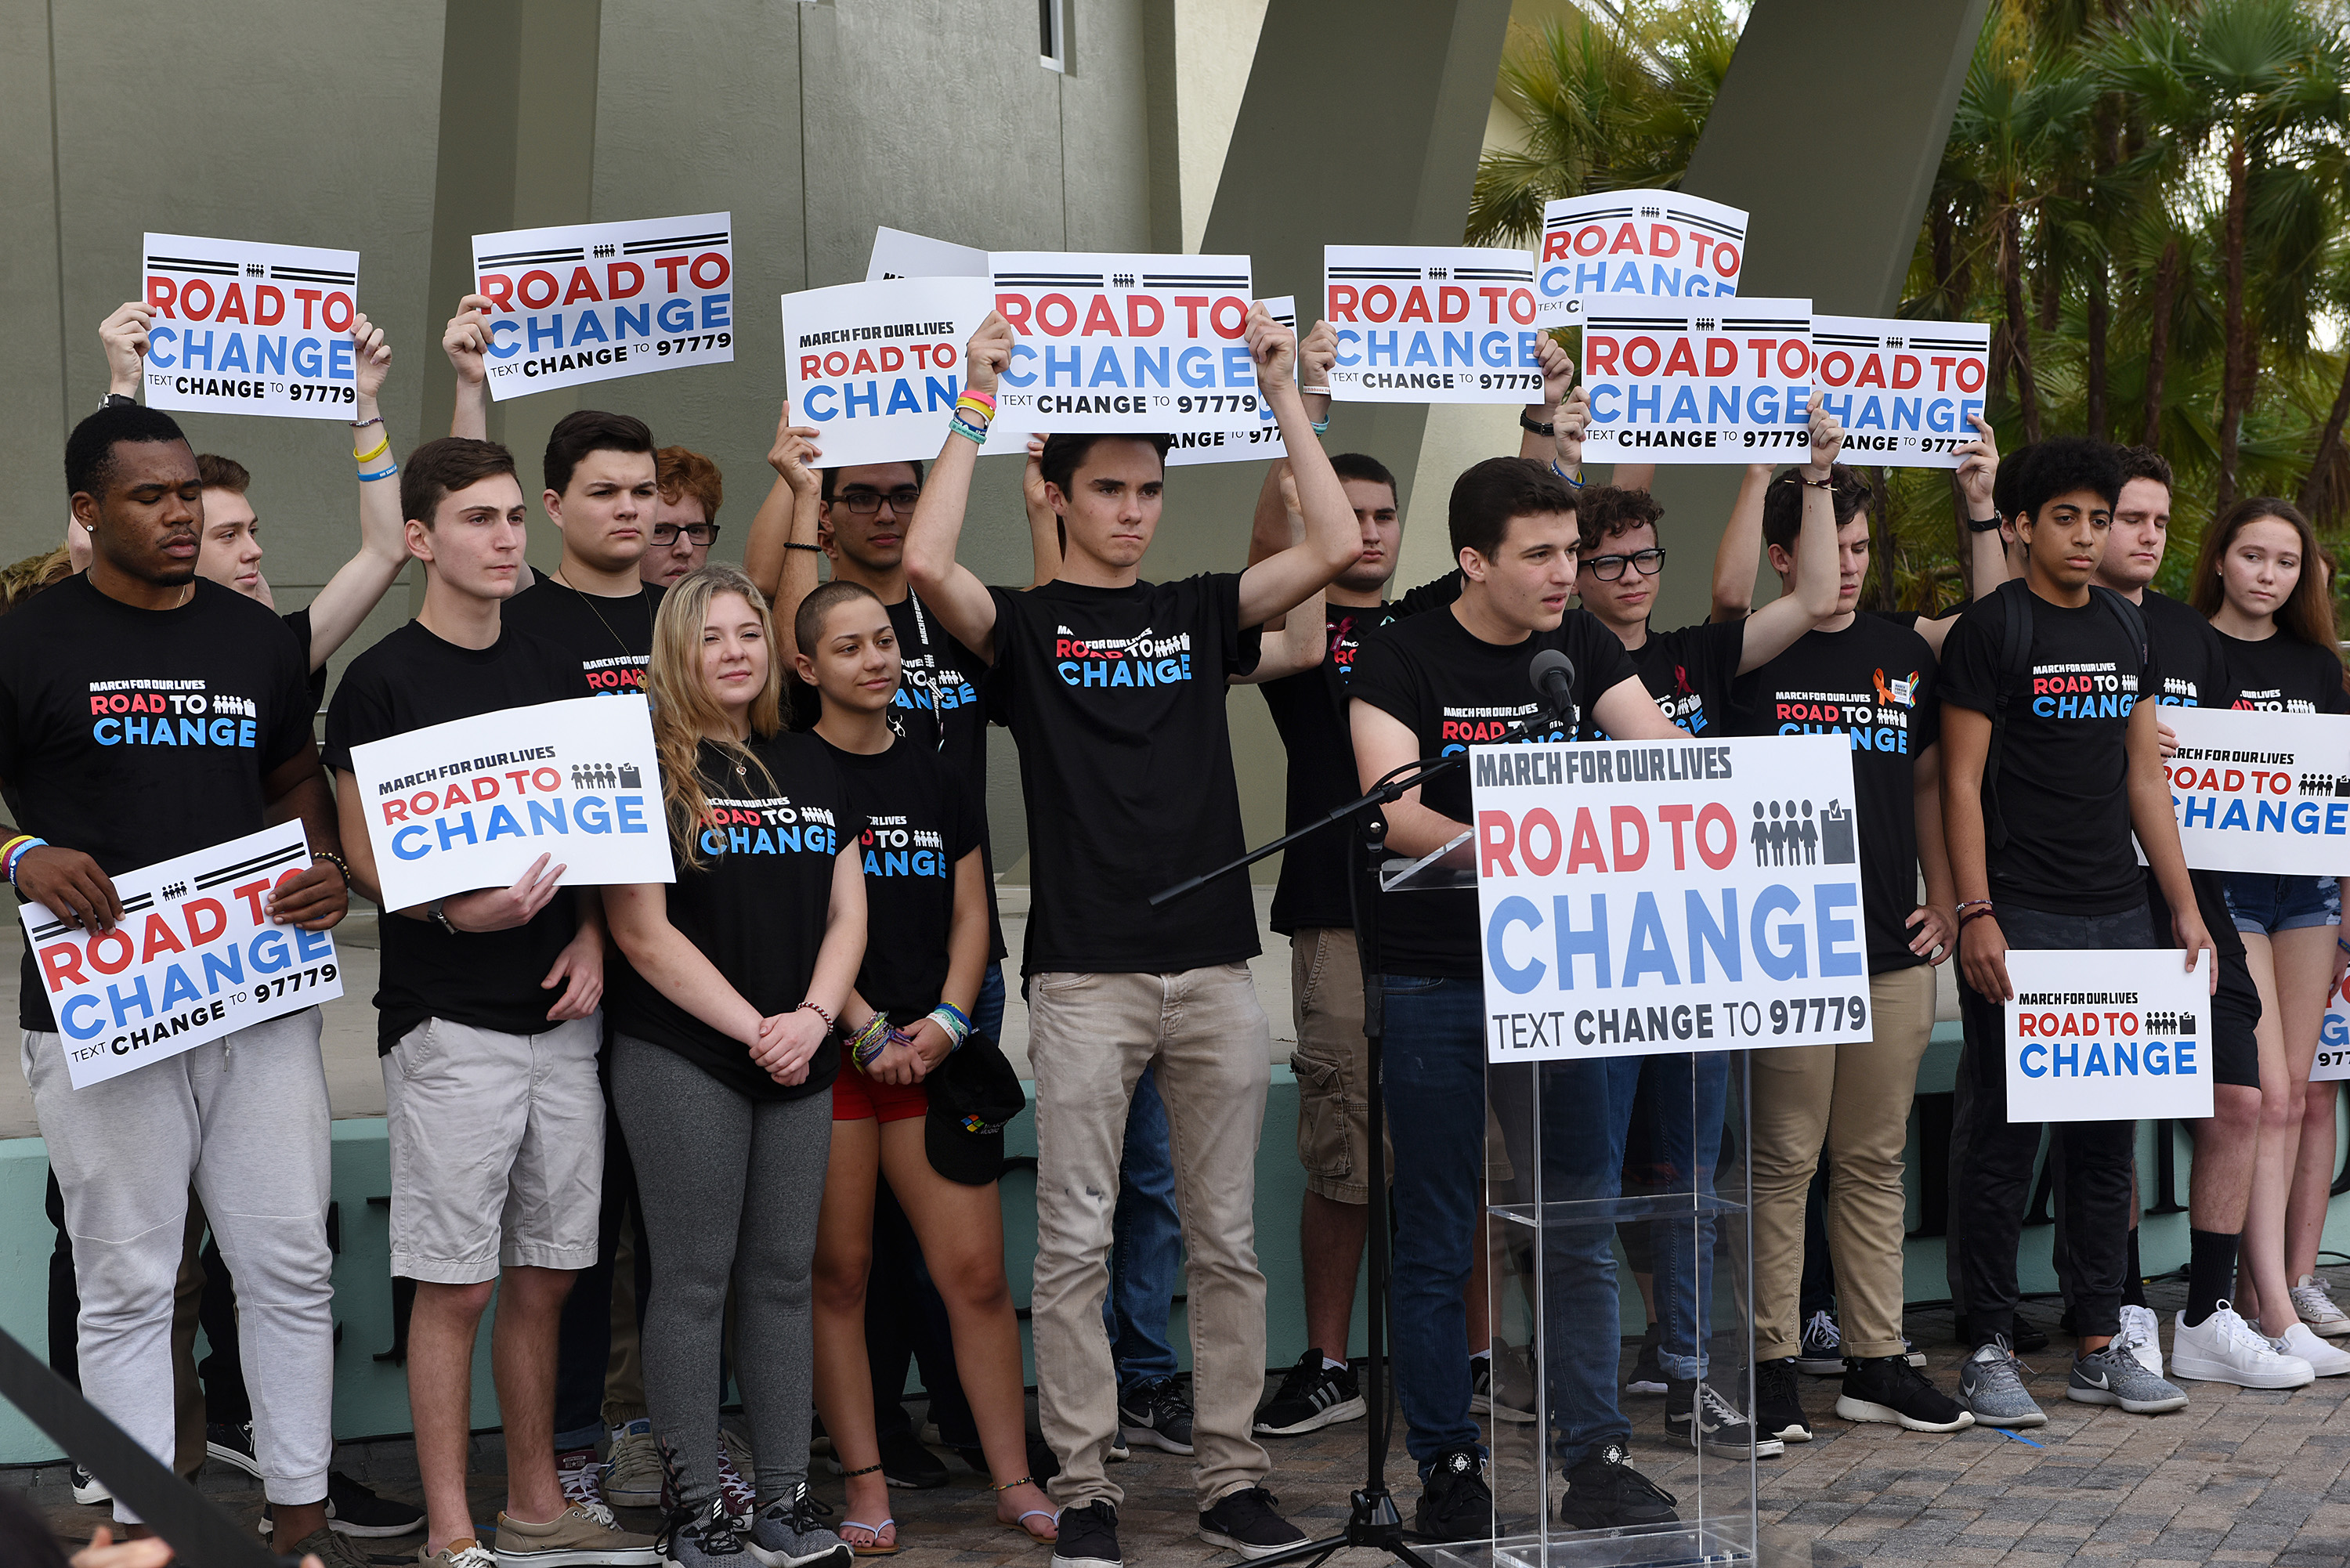 Marjory Stoneman Douglas students hold a press conference on June 4, 2018 in Parkland, Fla. to announce that this summer the students of March For Our Lives are making stops across America to get young people educated, registered and motivated to vote, calling it "March For Our Lives: Road to Change" (Taimy Alvarez—Sun Sentinel/TNS/Getty Images)